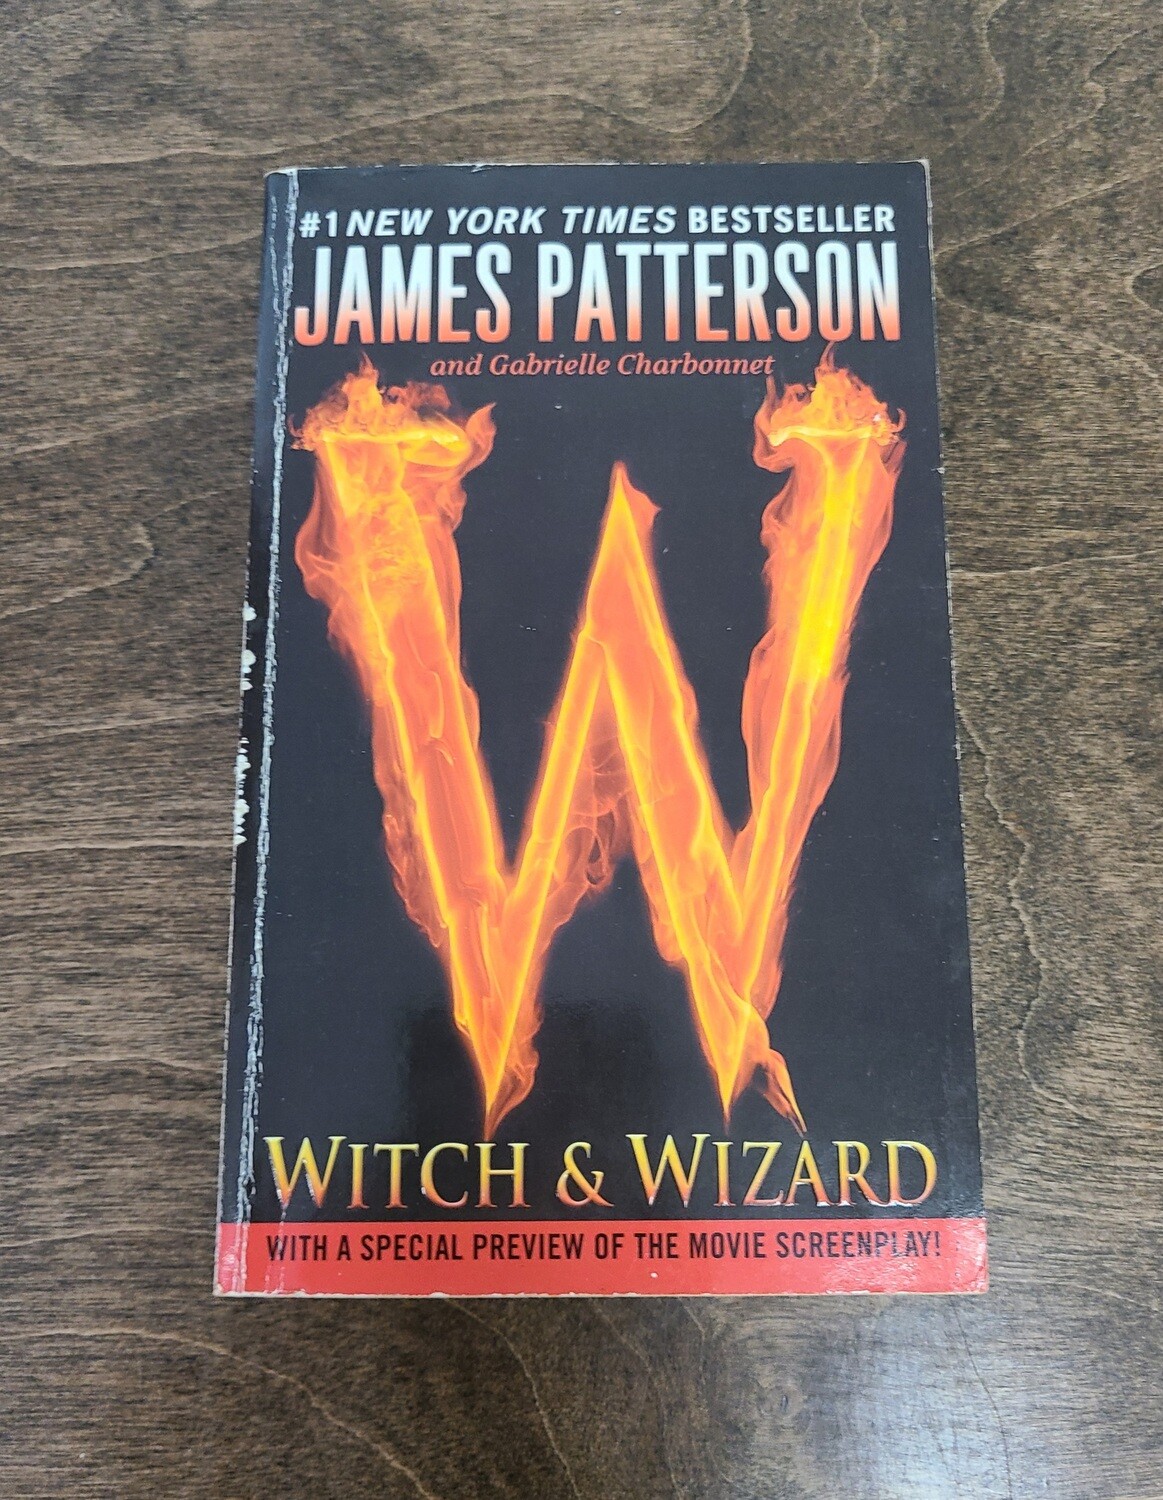 Witch and Wizard by James Patterson and Gabrielle Charbonnet